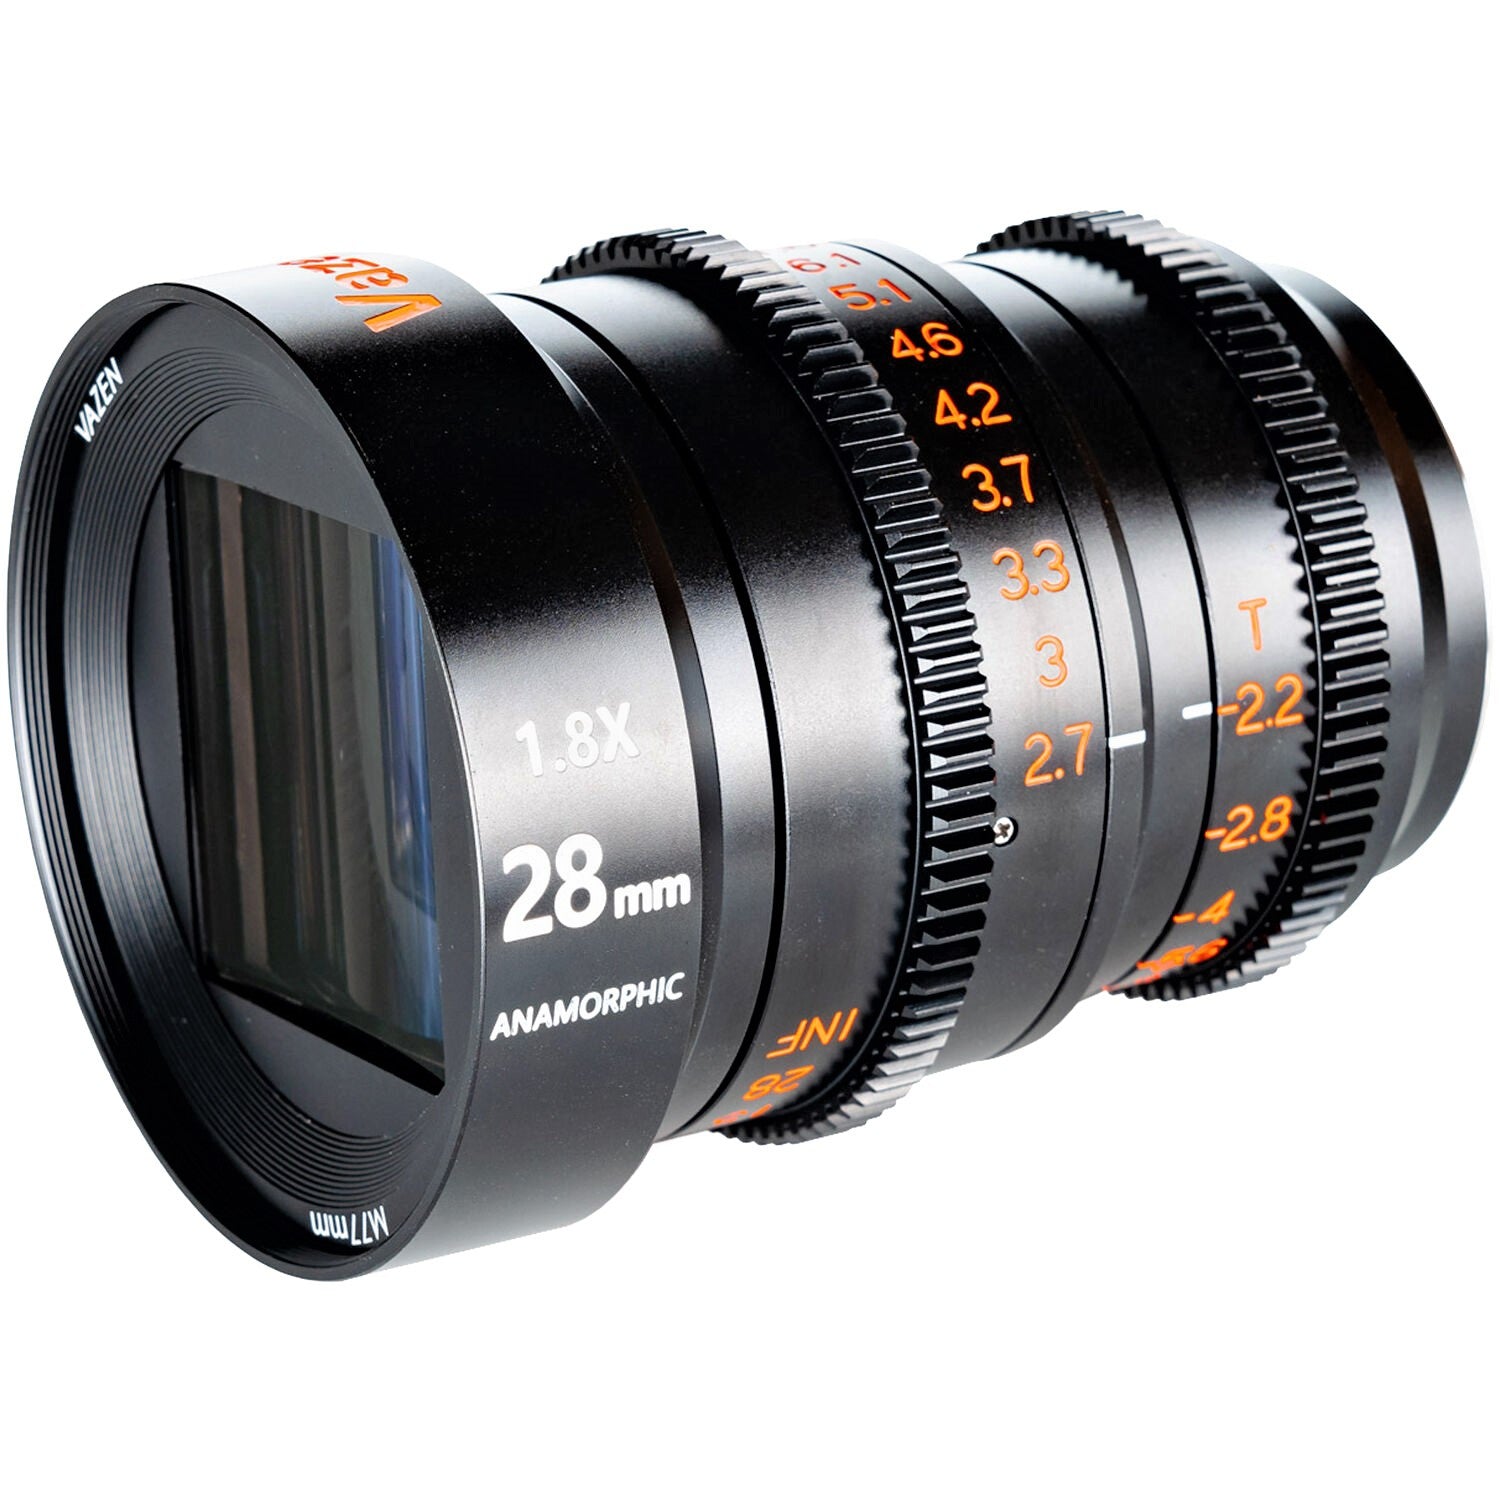 Vazen 28mm T/2.2 1.8X Anamorphic Lens (RF Mount, Amber Flare) in a Front-Side View